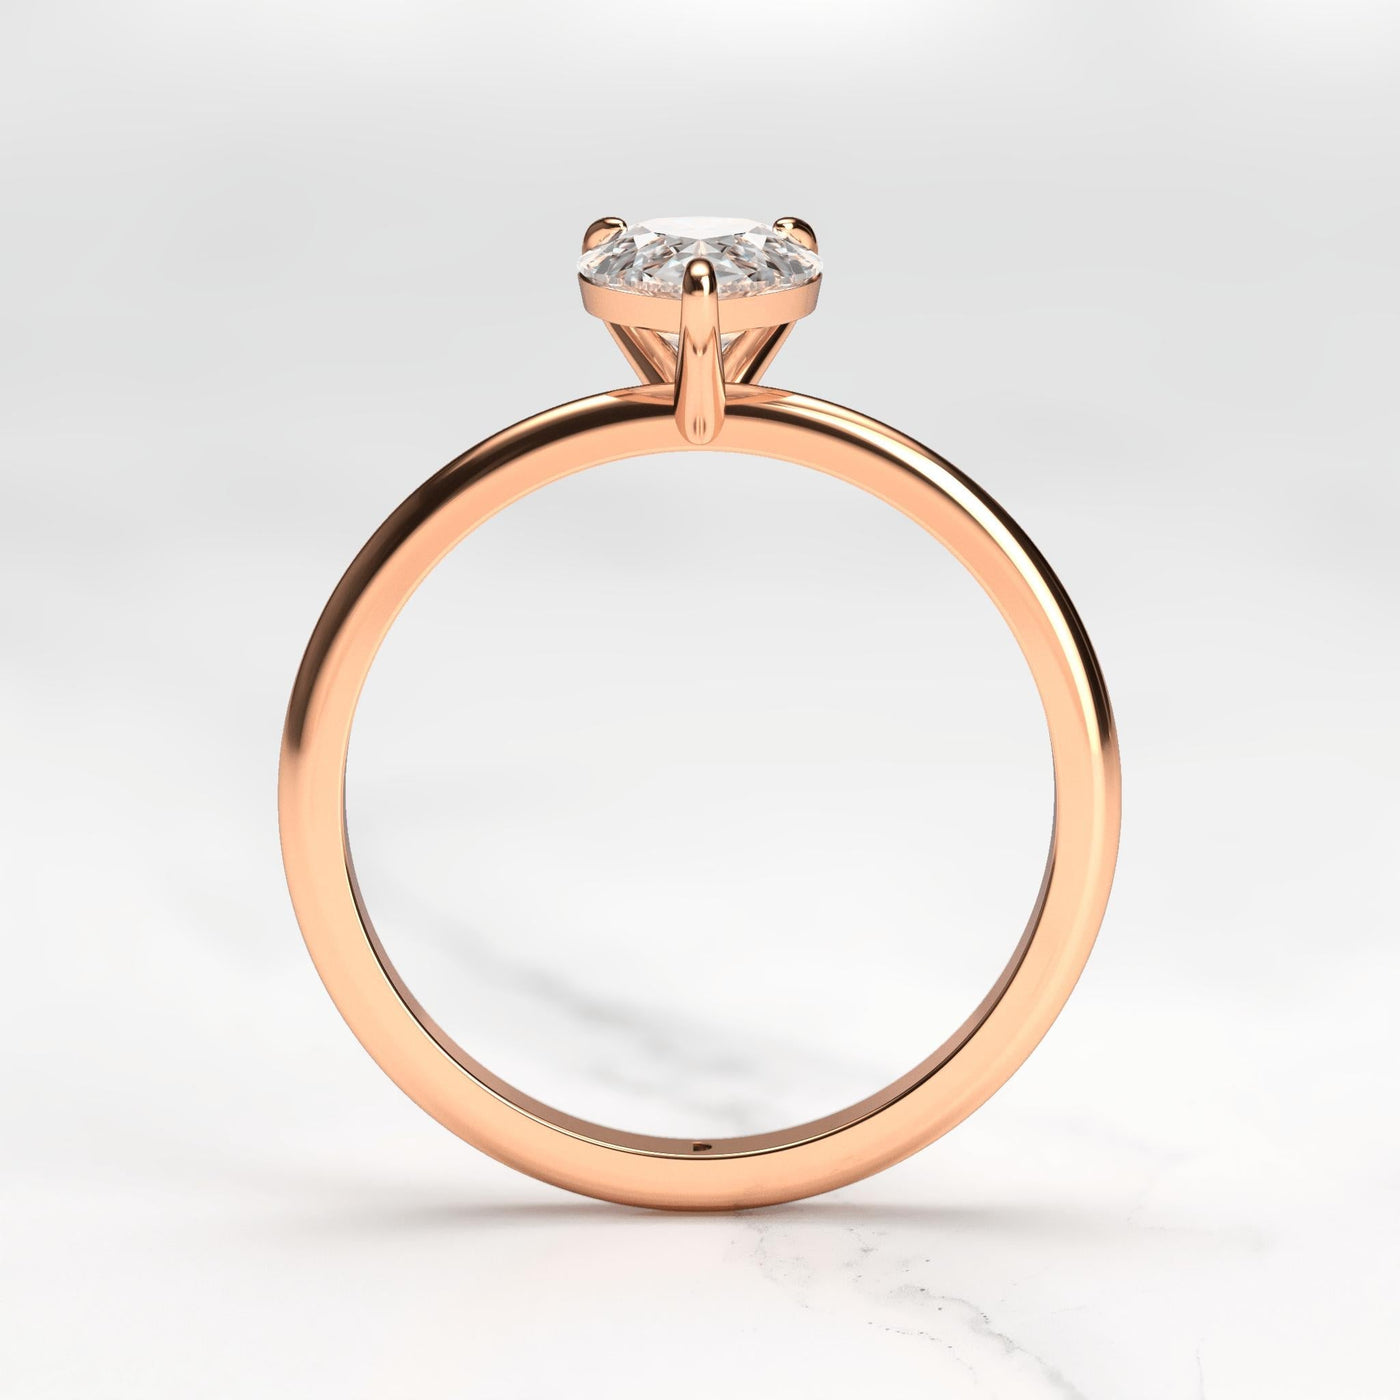 Pear-shaped tapered solitaire diamond ring